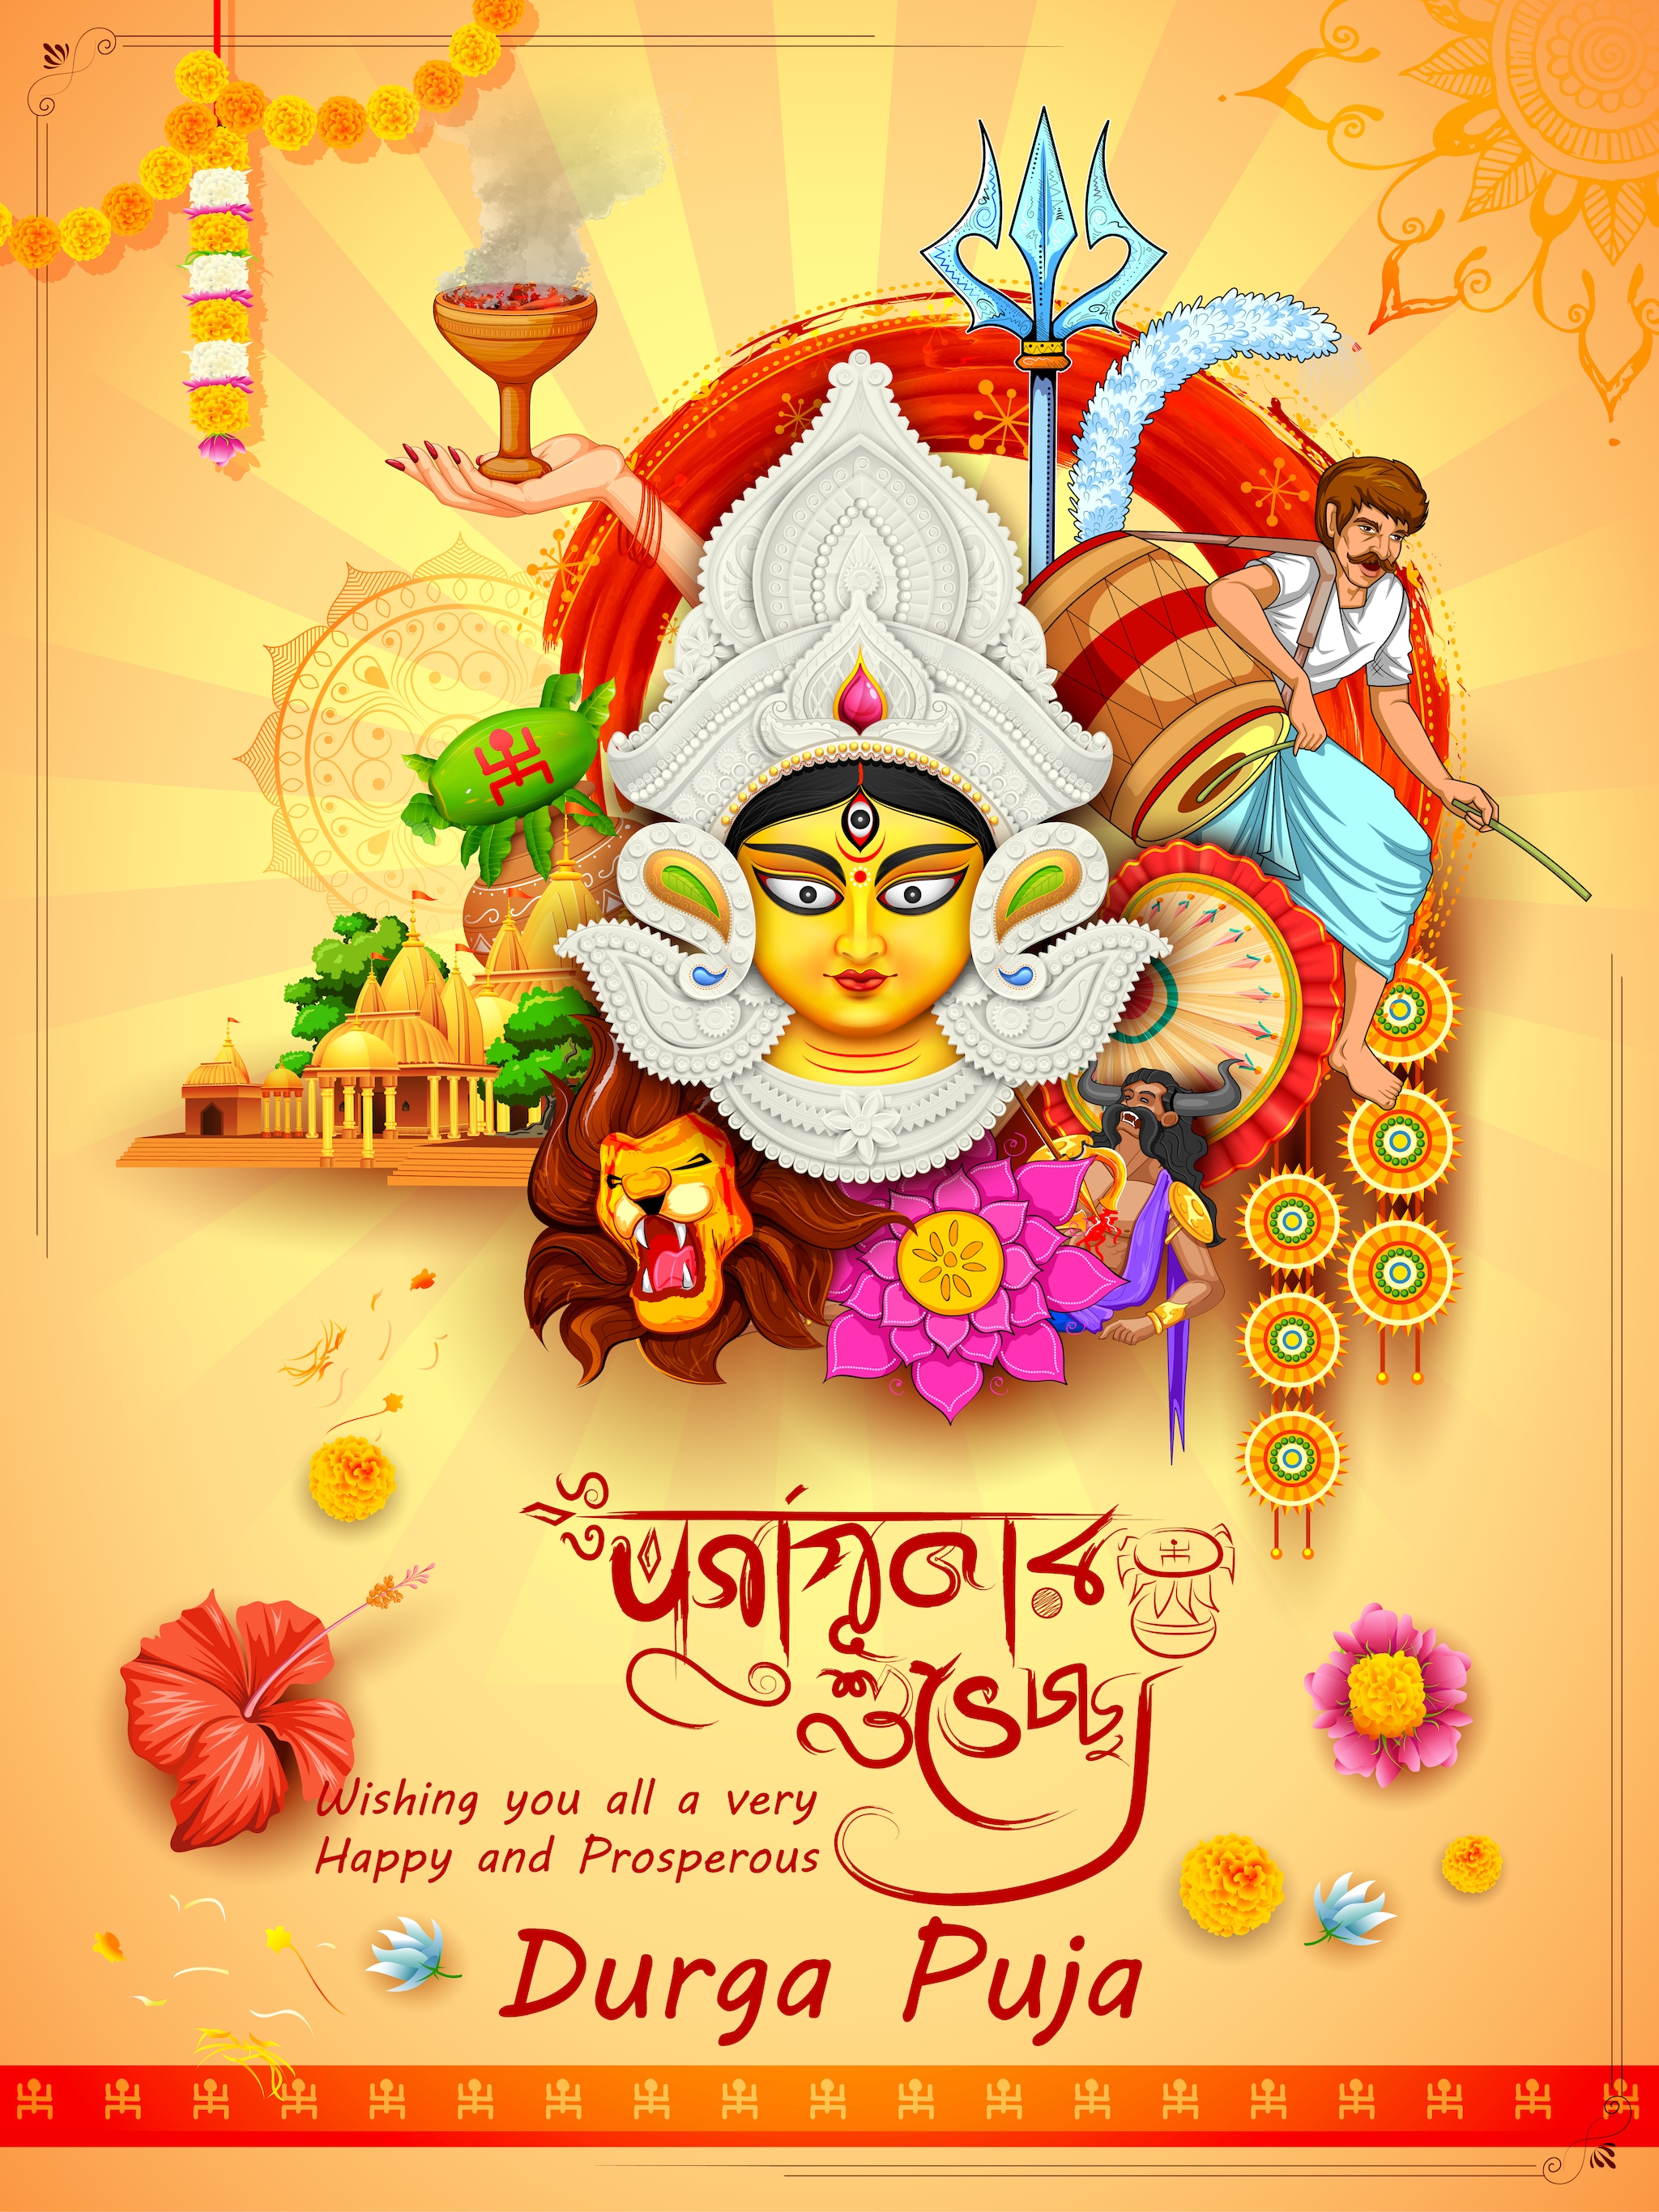 Happy Maha Saptami 2022: Images, Wishes, Quotes, Messages and WhatsApp Greetings to Share. (Image: Shutterstock)